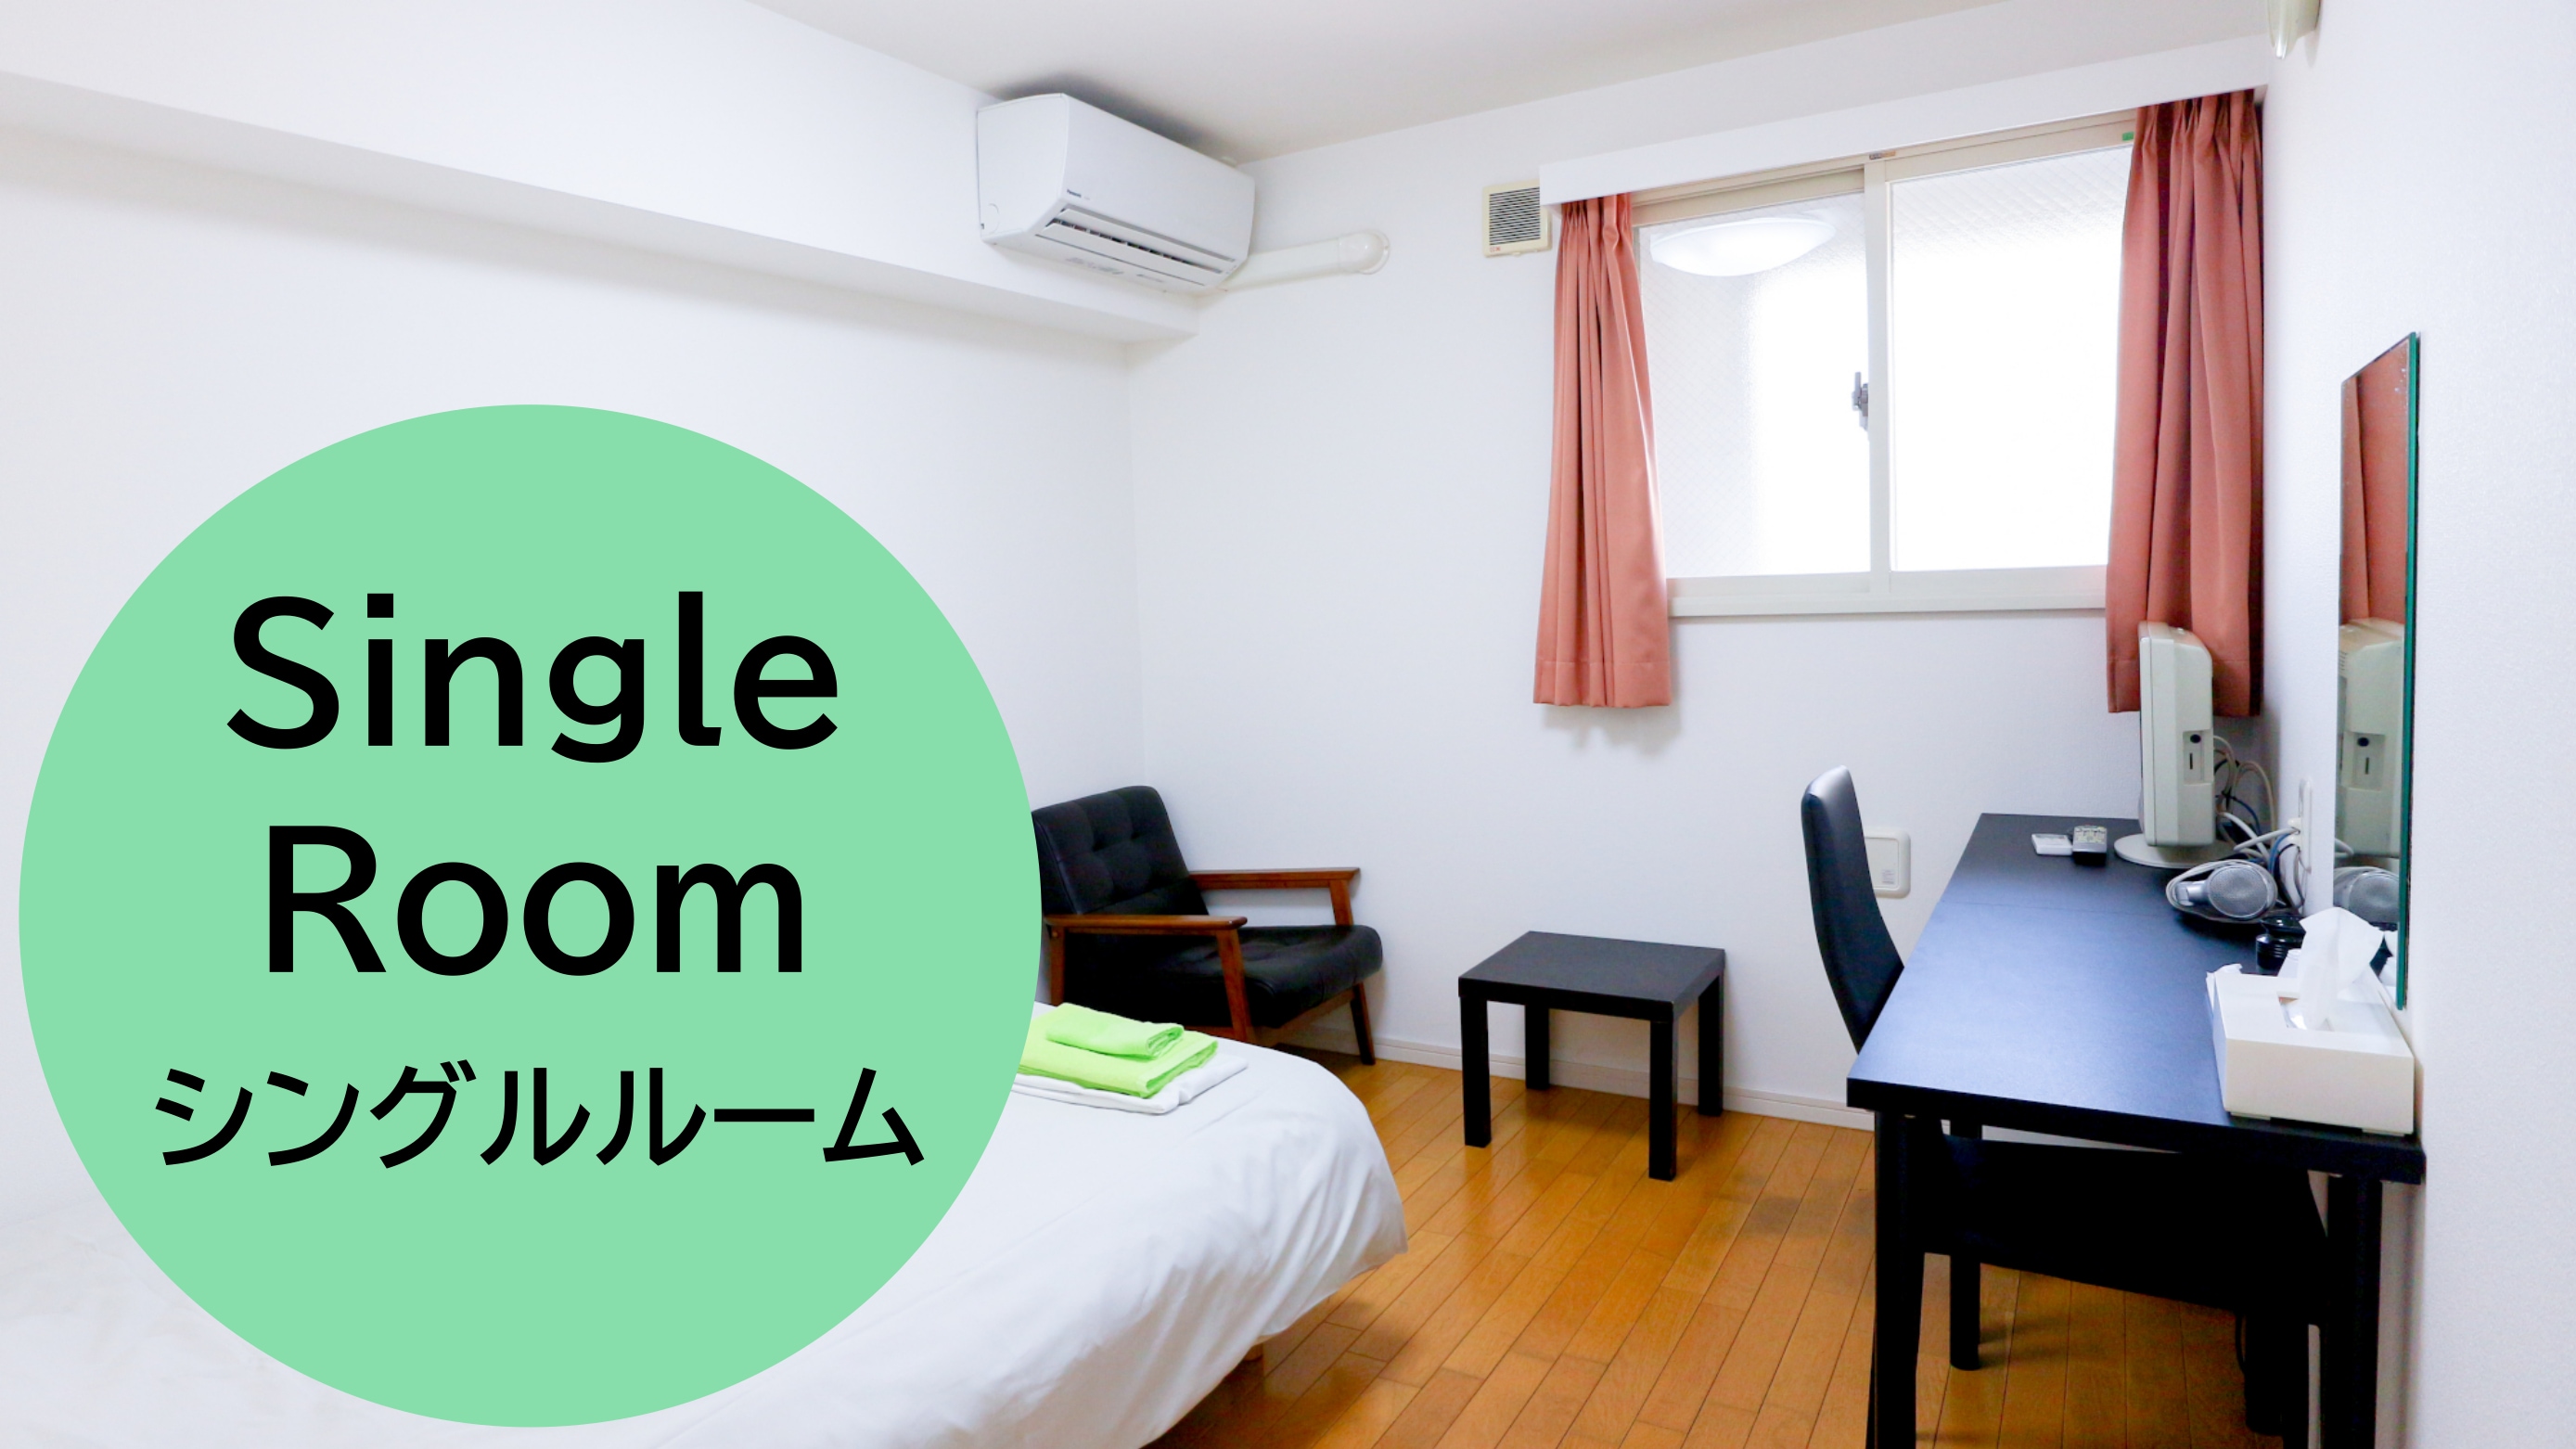 Single room with letters